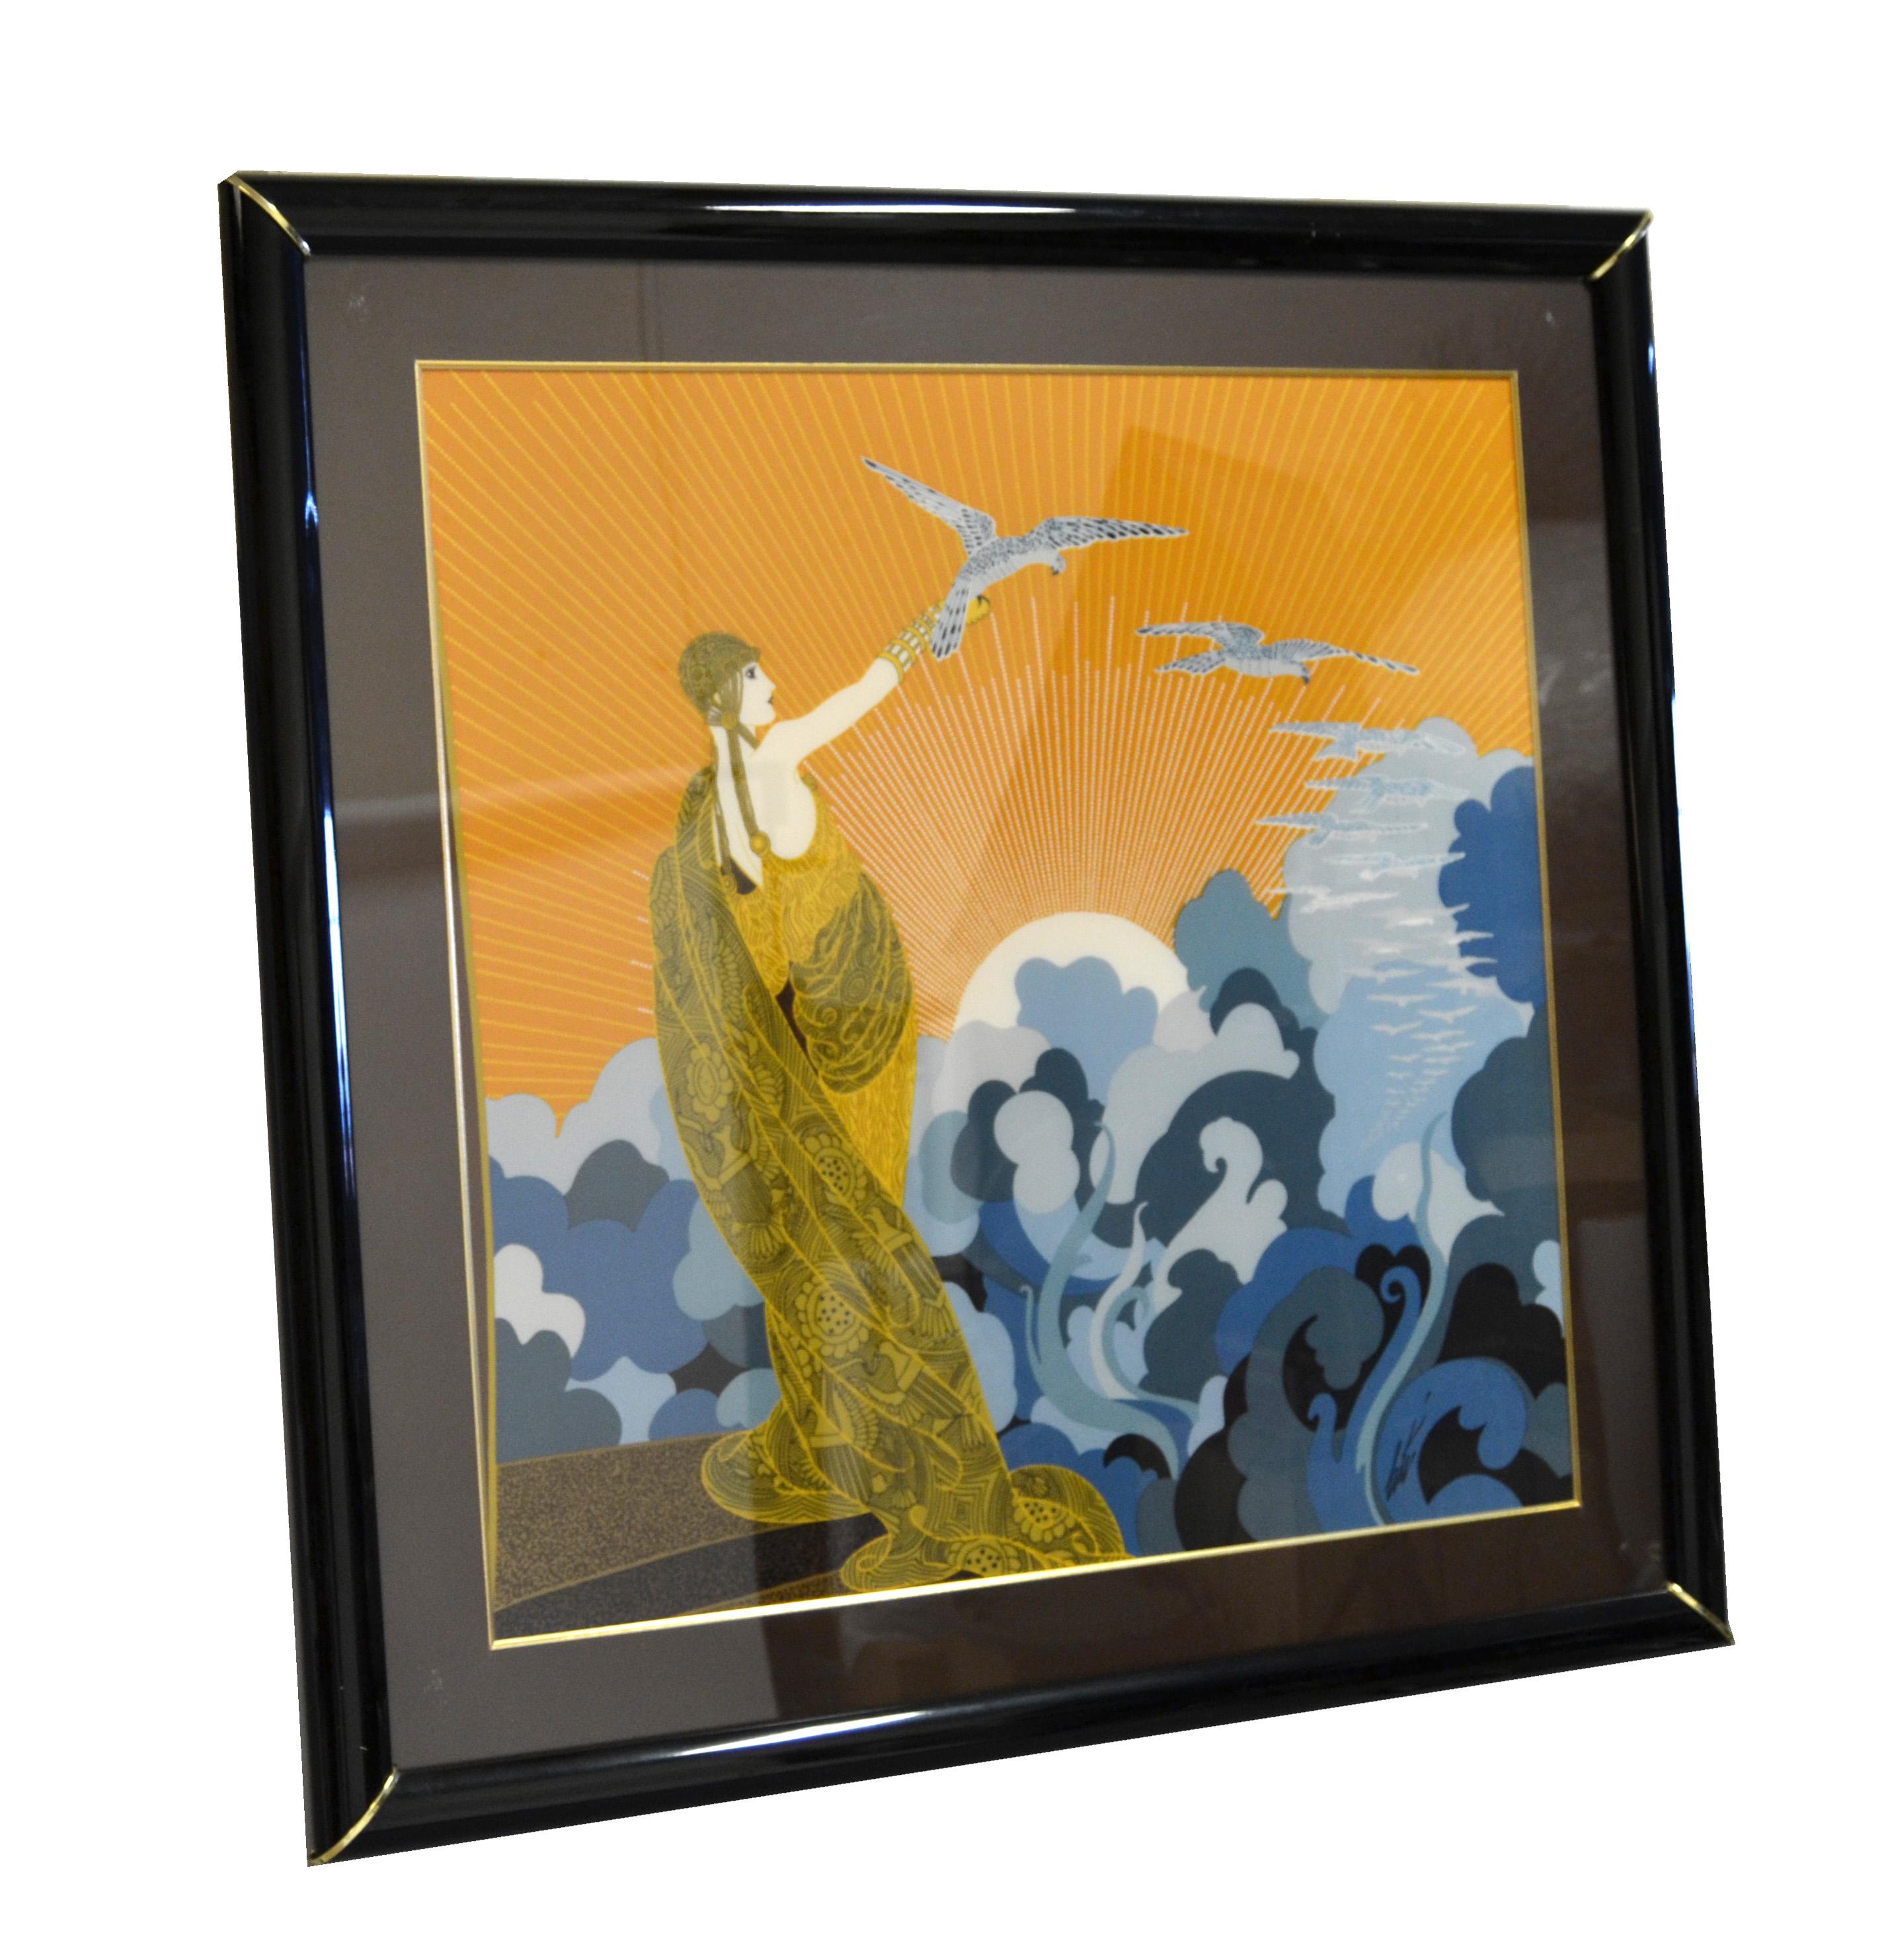 Romain de Tirtoff 'Erté' Wings of Victory Art Deco Framed Silk Scarf Wall Art In Good Condition For Sale In Miami, FL